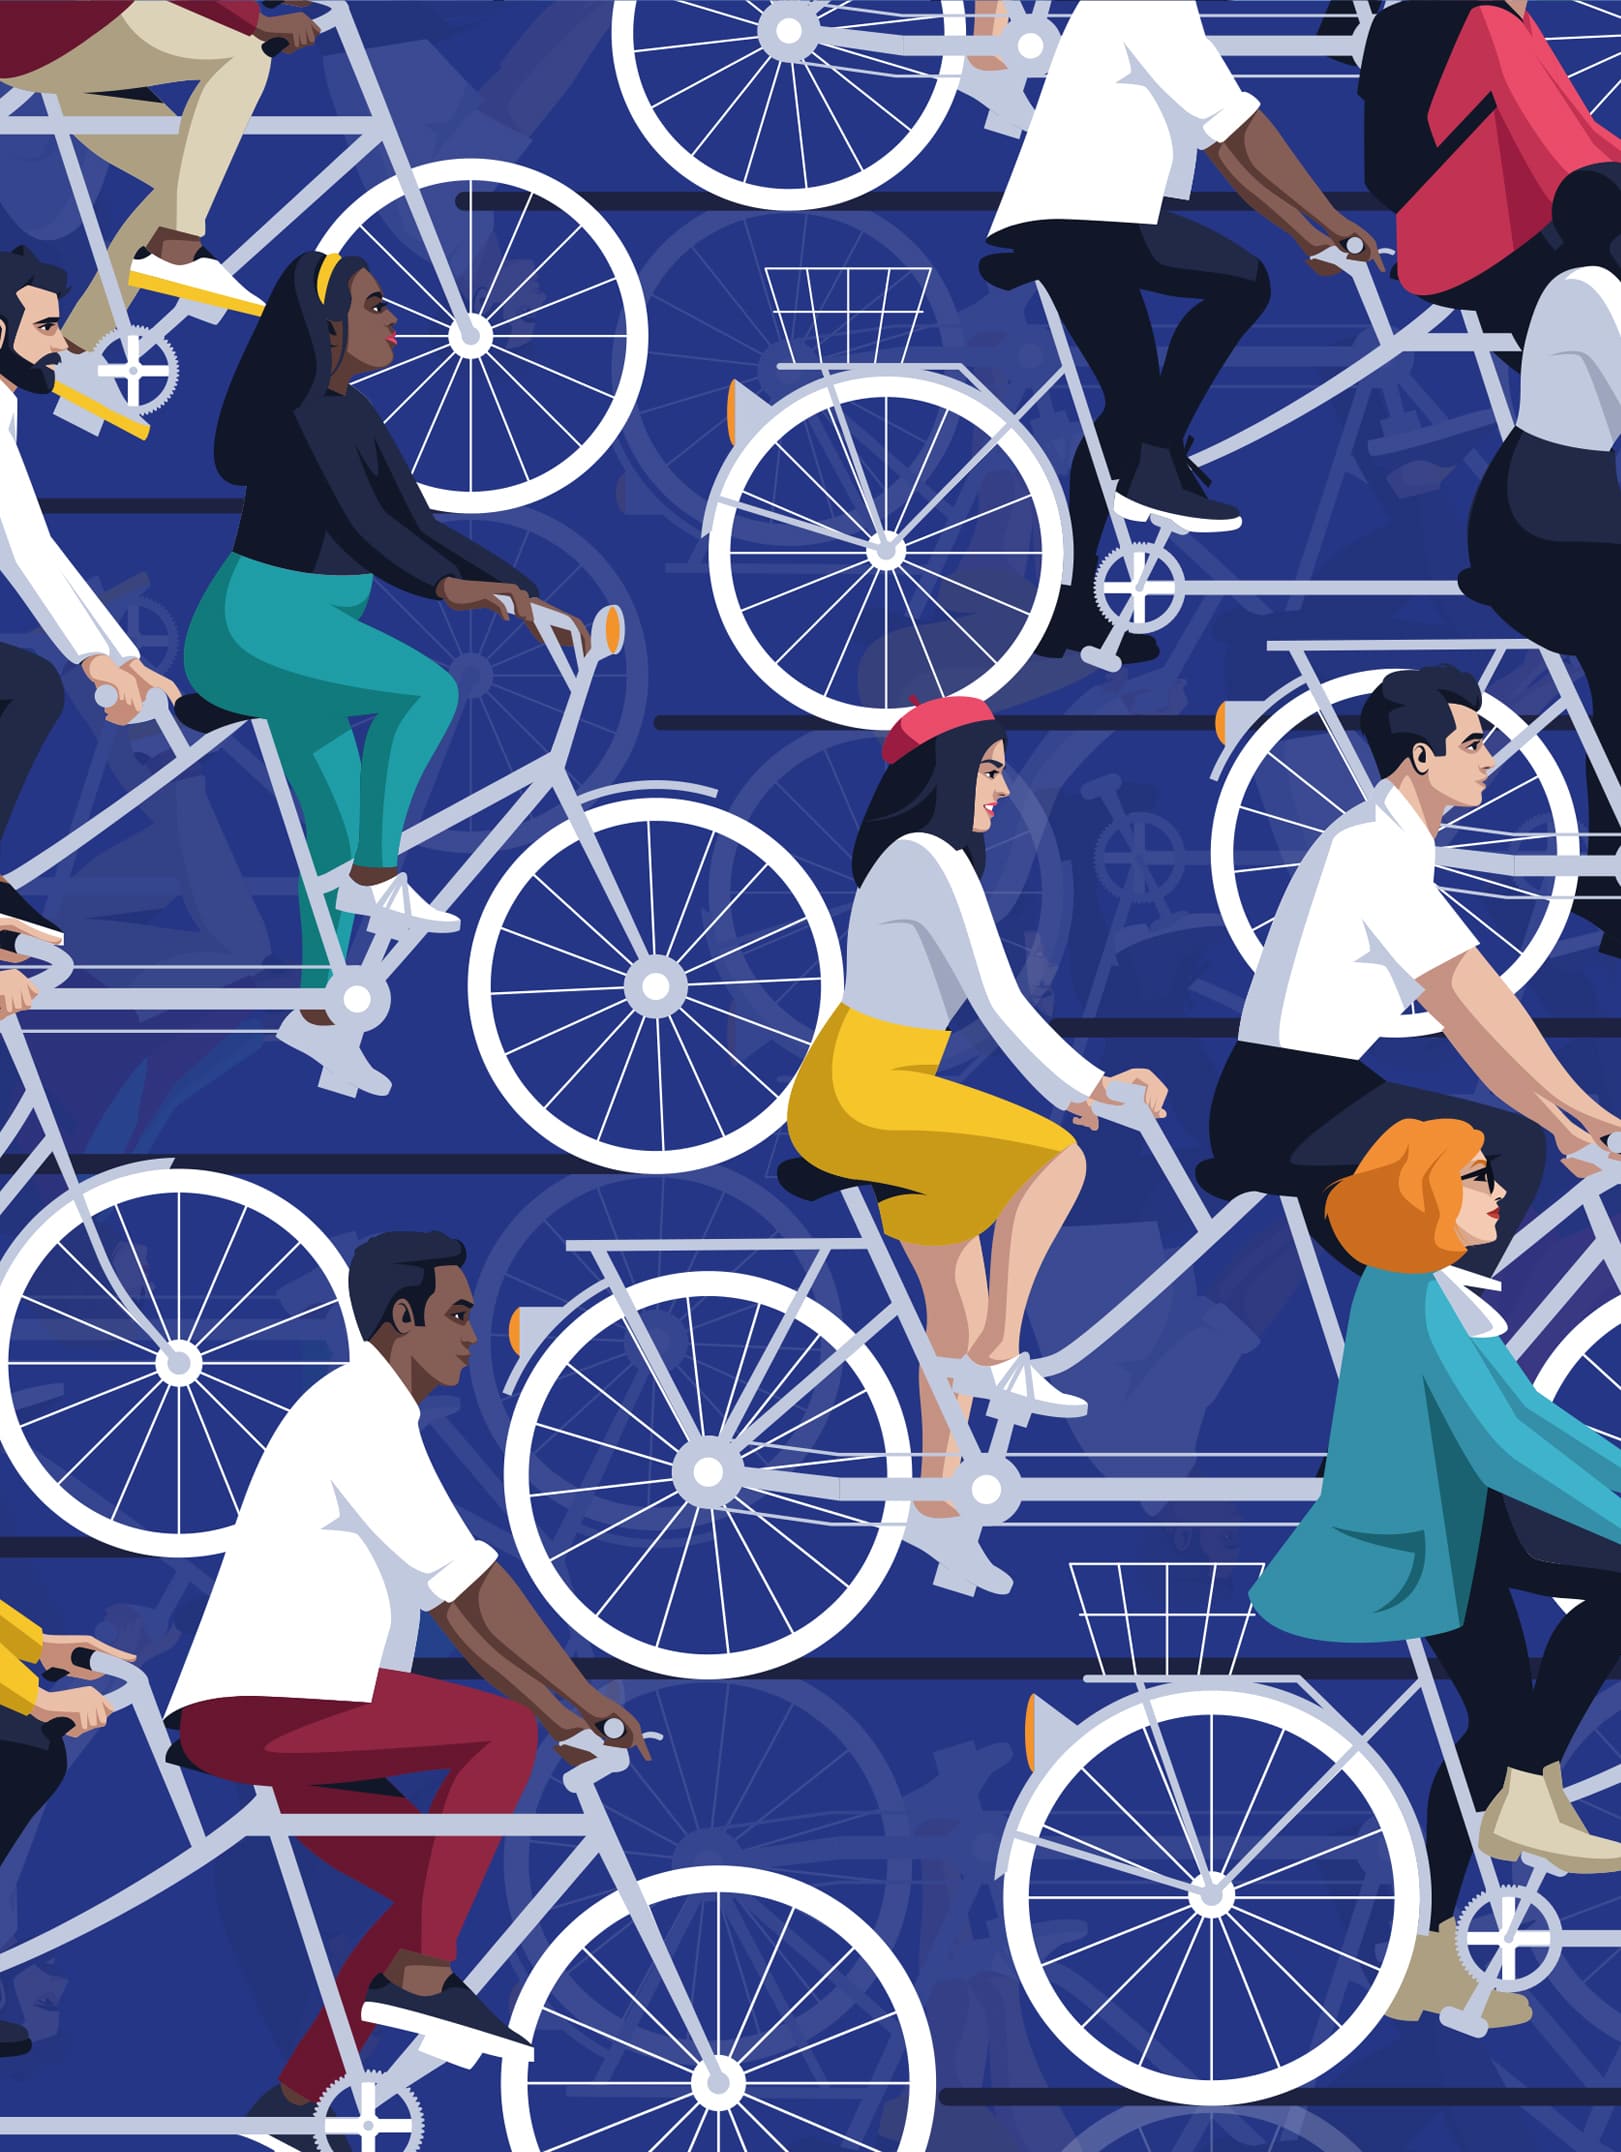 Illustration for the Representation of the European Commission in Spain - cyclists on blue background.